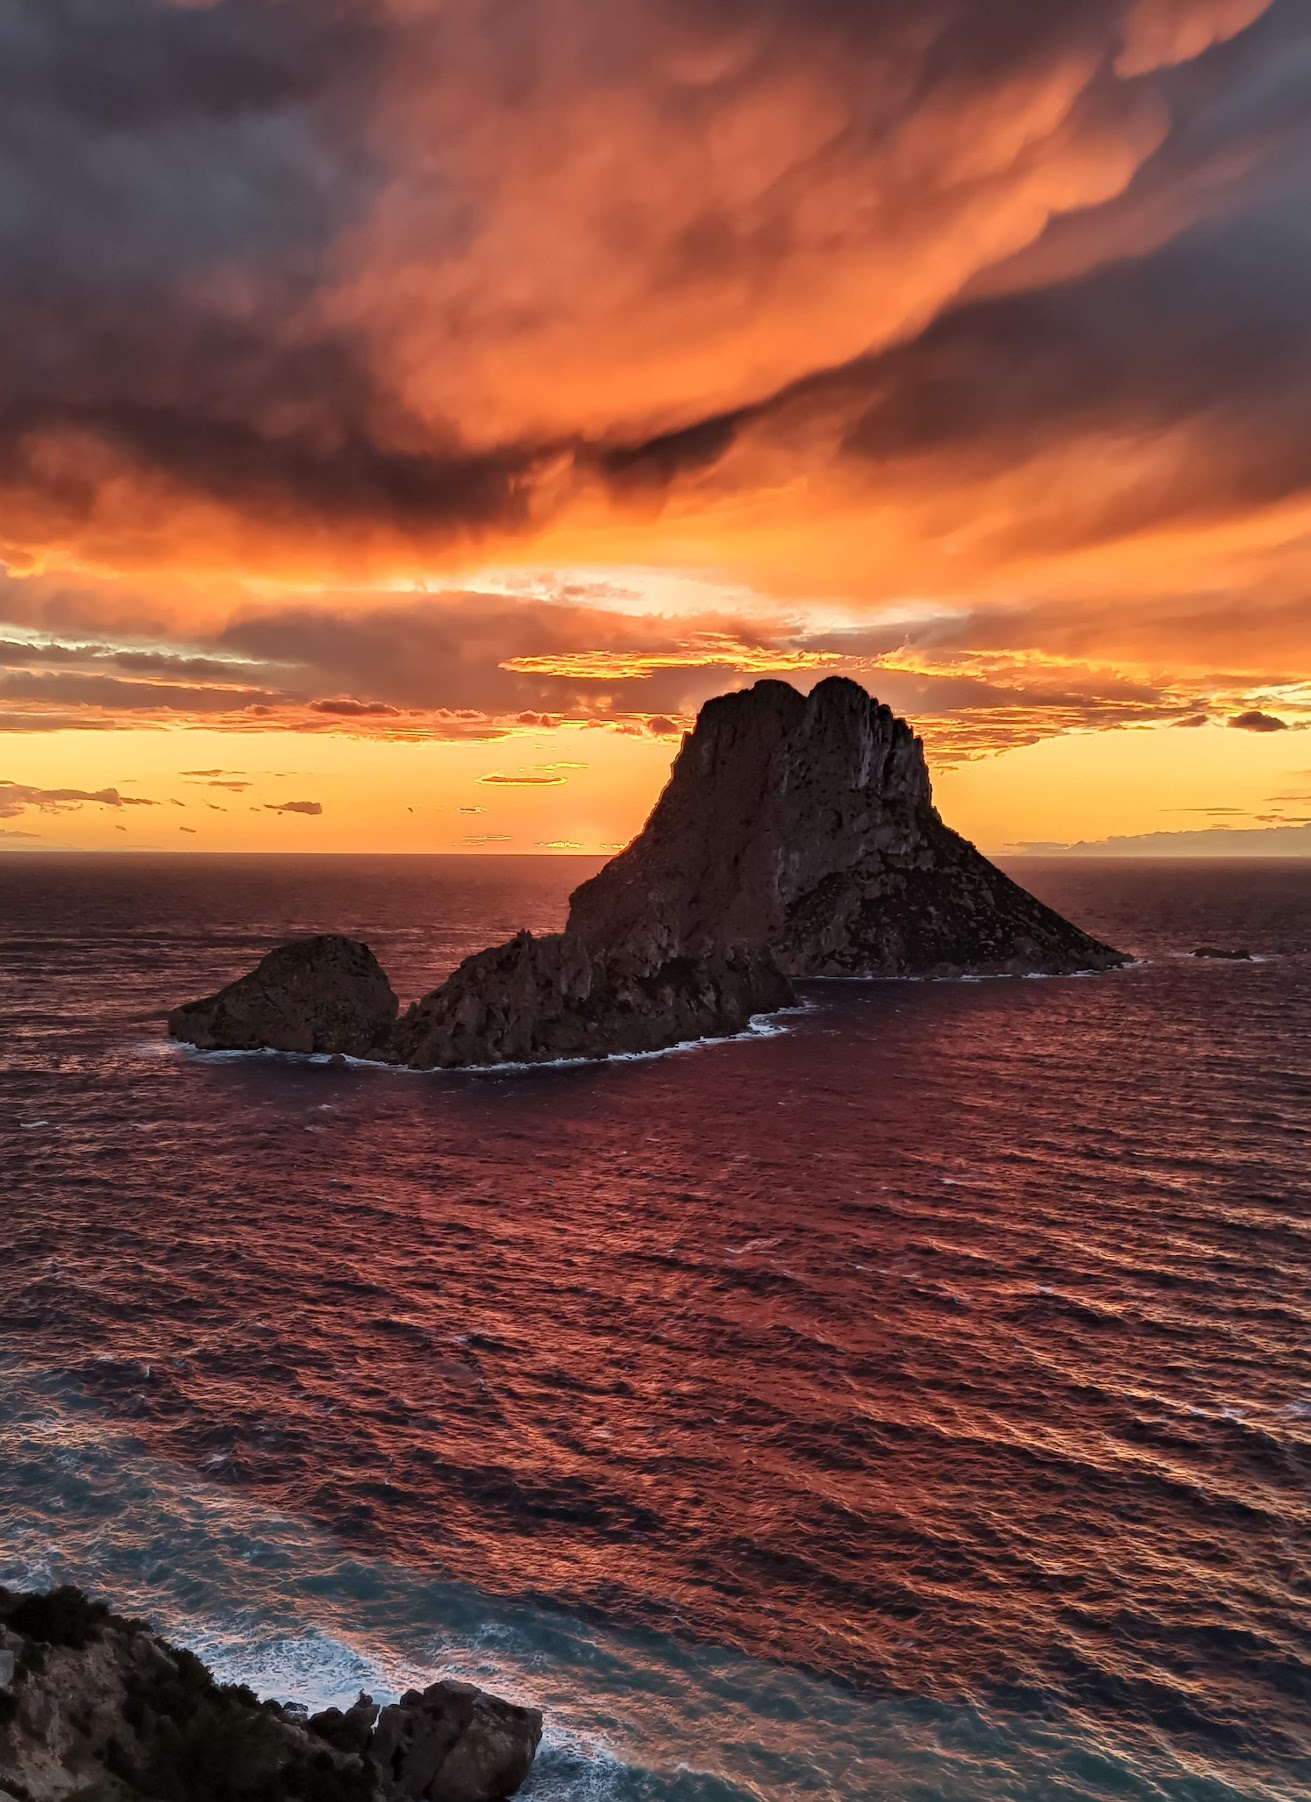 Golden October in Ibiza – and “The last chance to dance!”